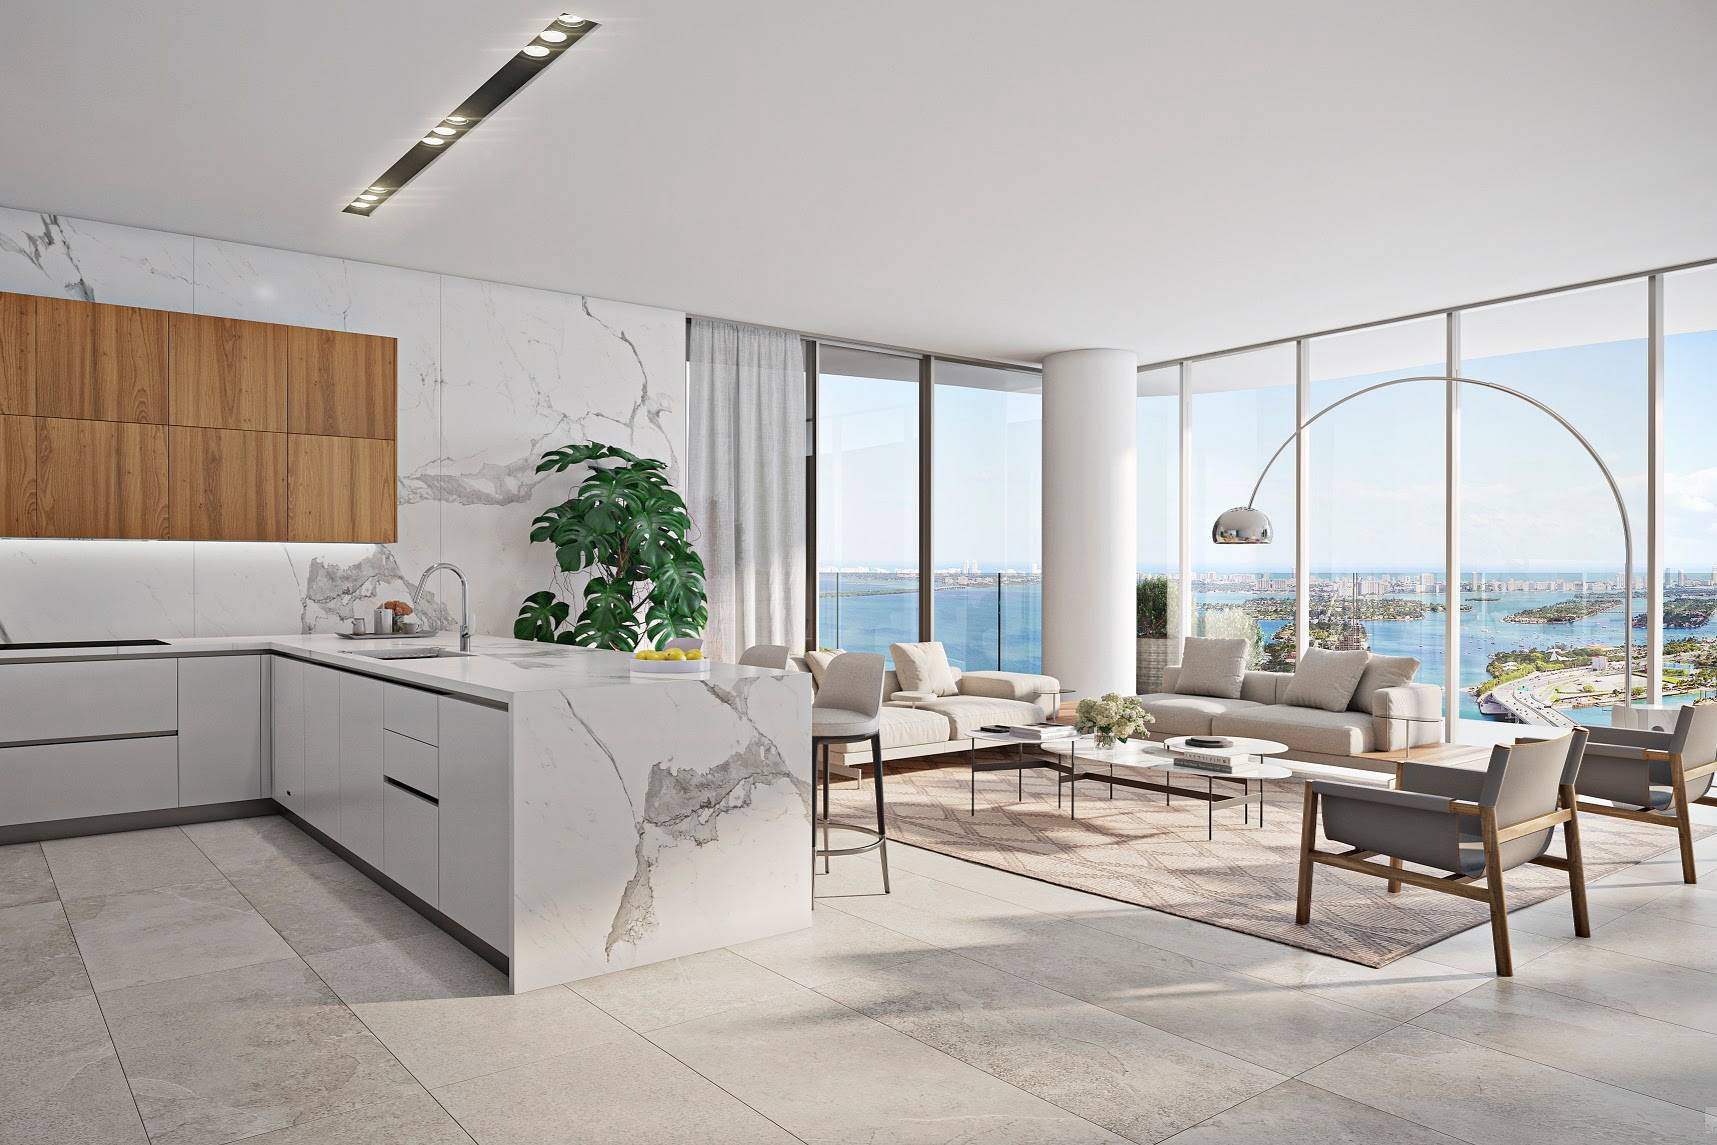 3 Bed 3.5 bath Italian Inspired Residence in Downtown Miami | Pre-Construction